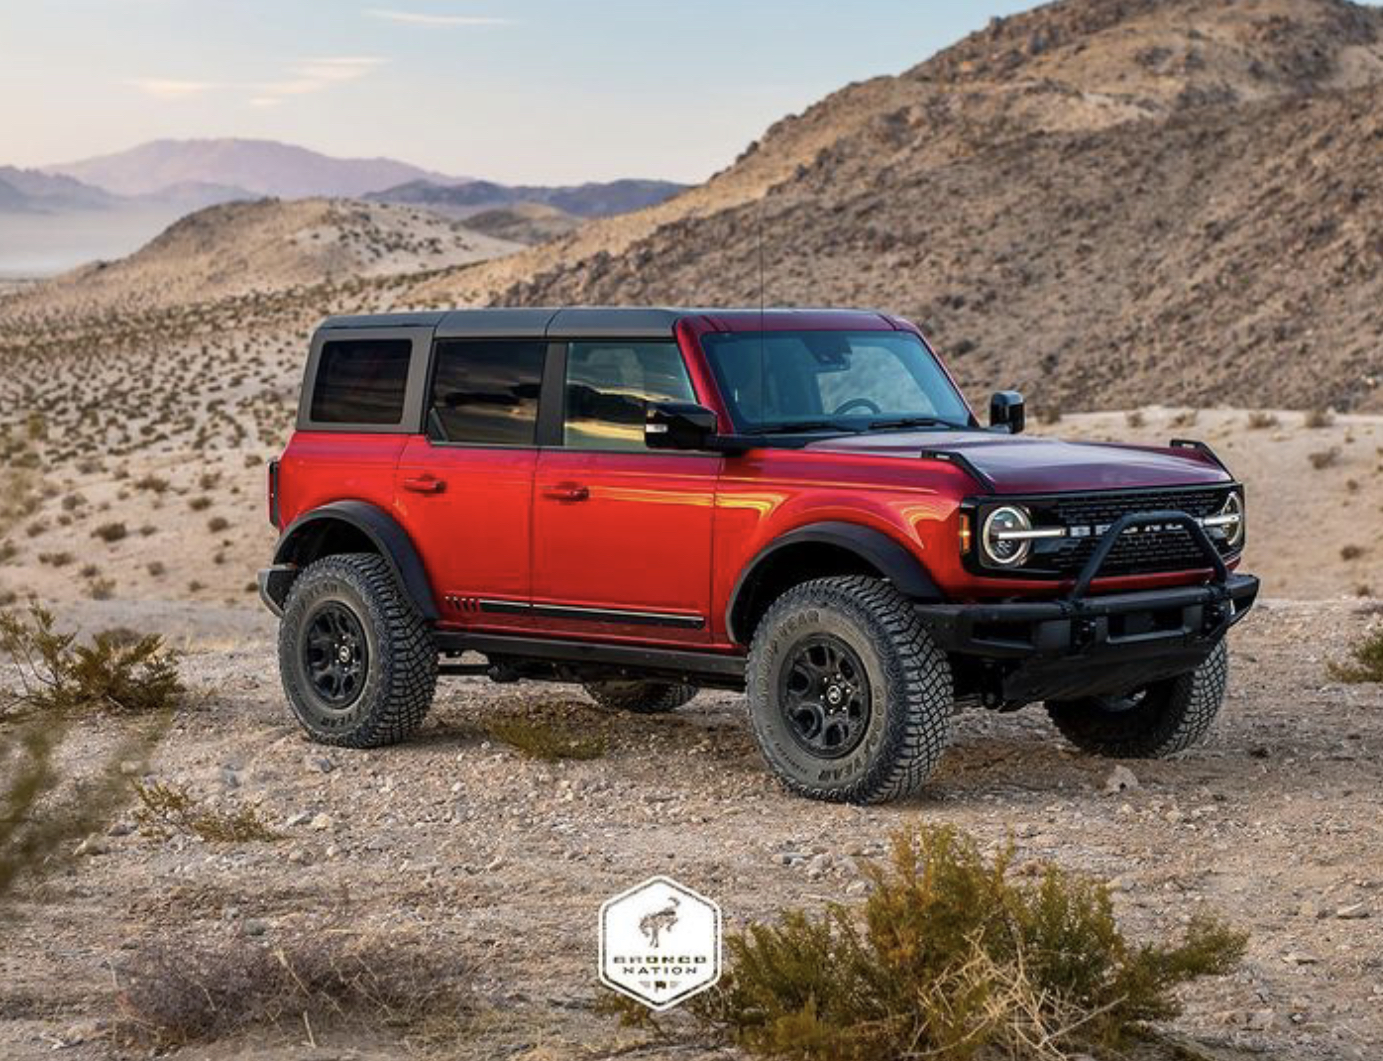 Ford Bronco CACTUS GRAY THREAD!!!! if you’re choosing cactus gray lemme know. I think it’s the best color available at the moment. 33B8821C-82E7-42AB-A6DA-4637E8D9D756